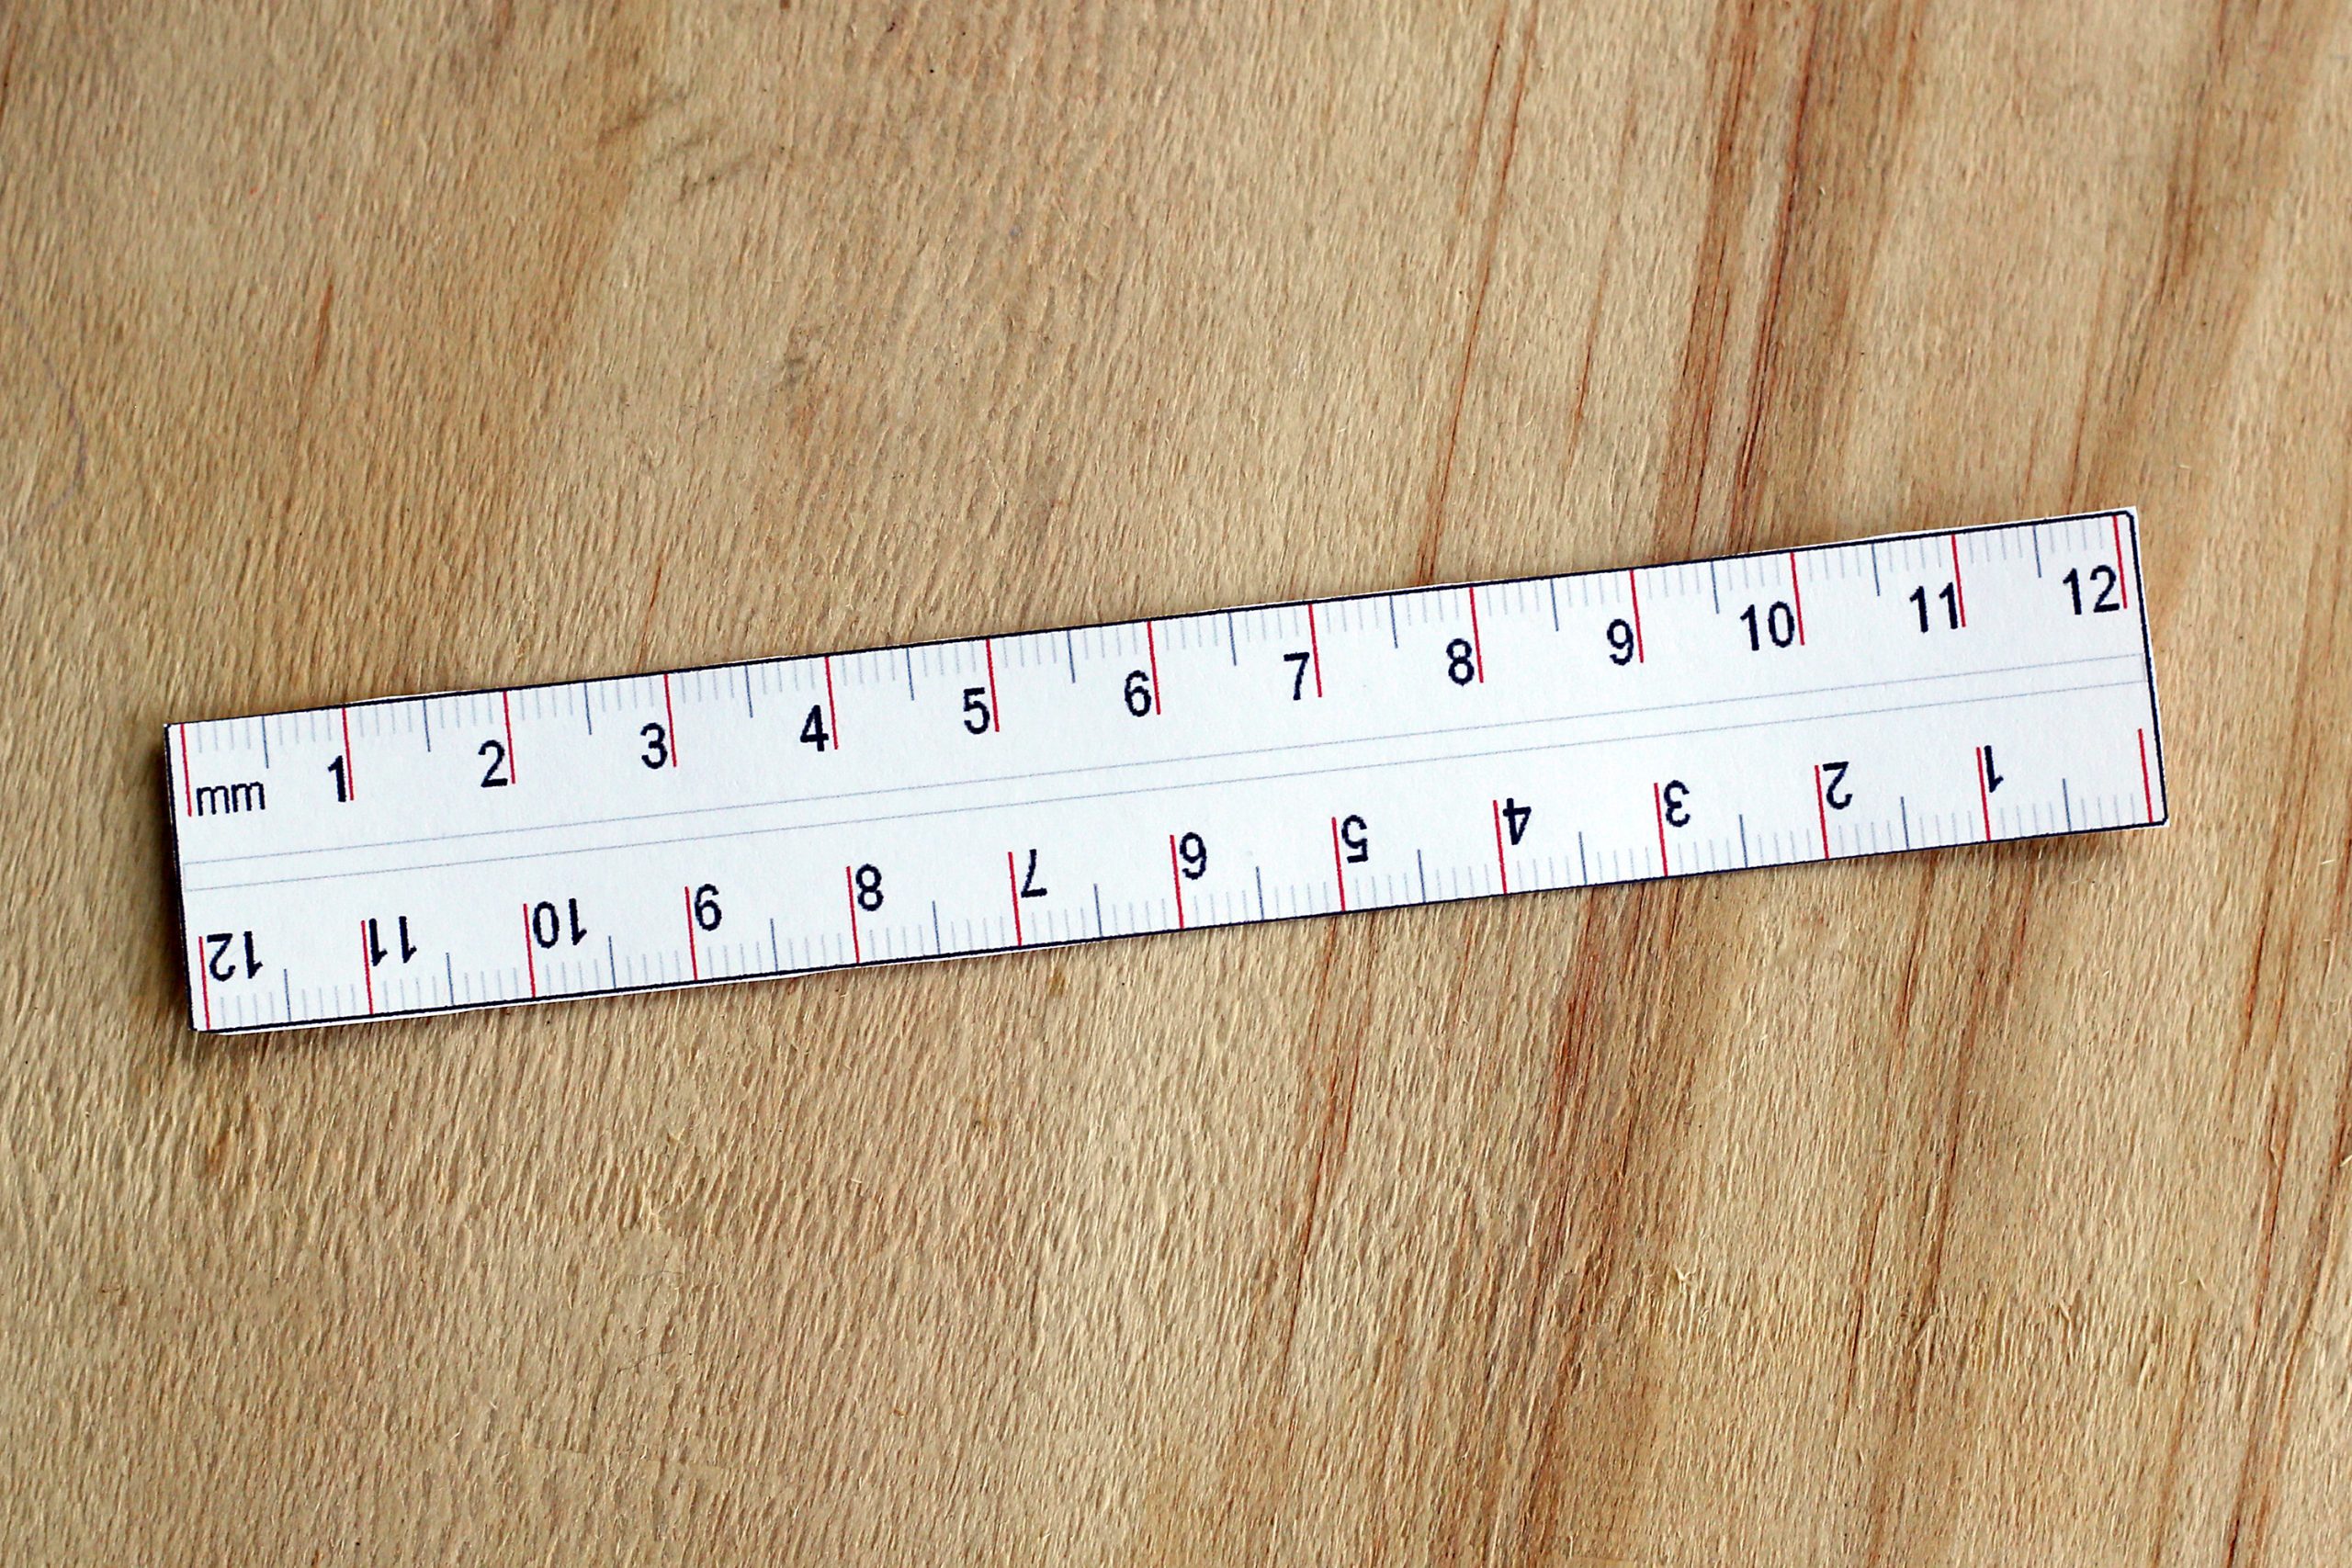 How To Read Mm On A Ruler